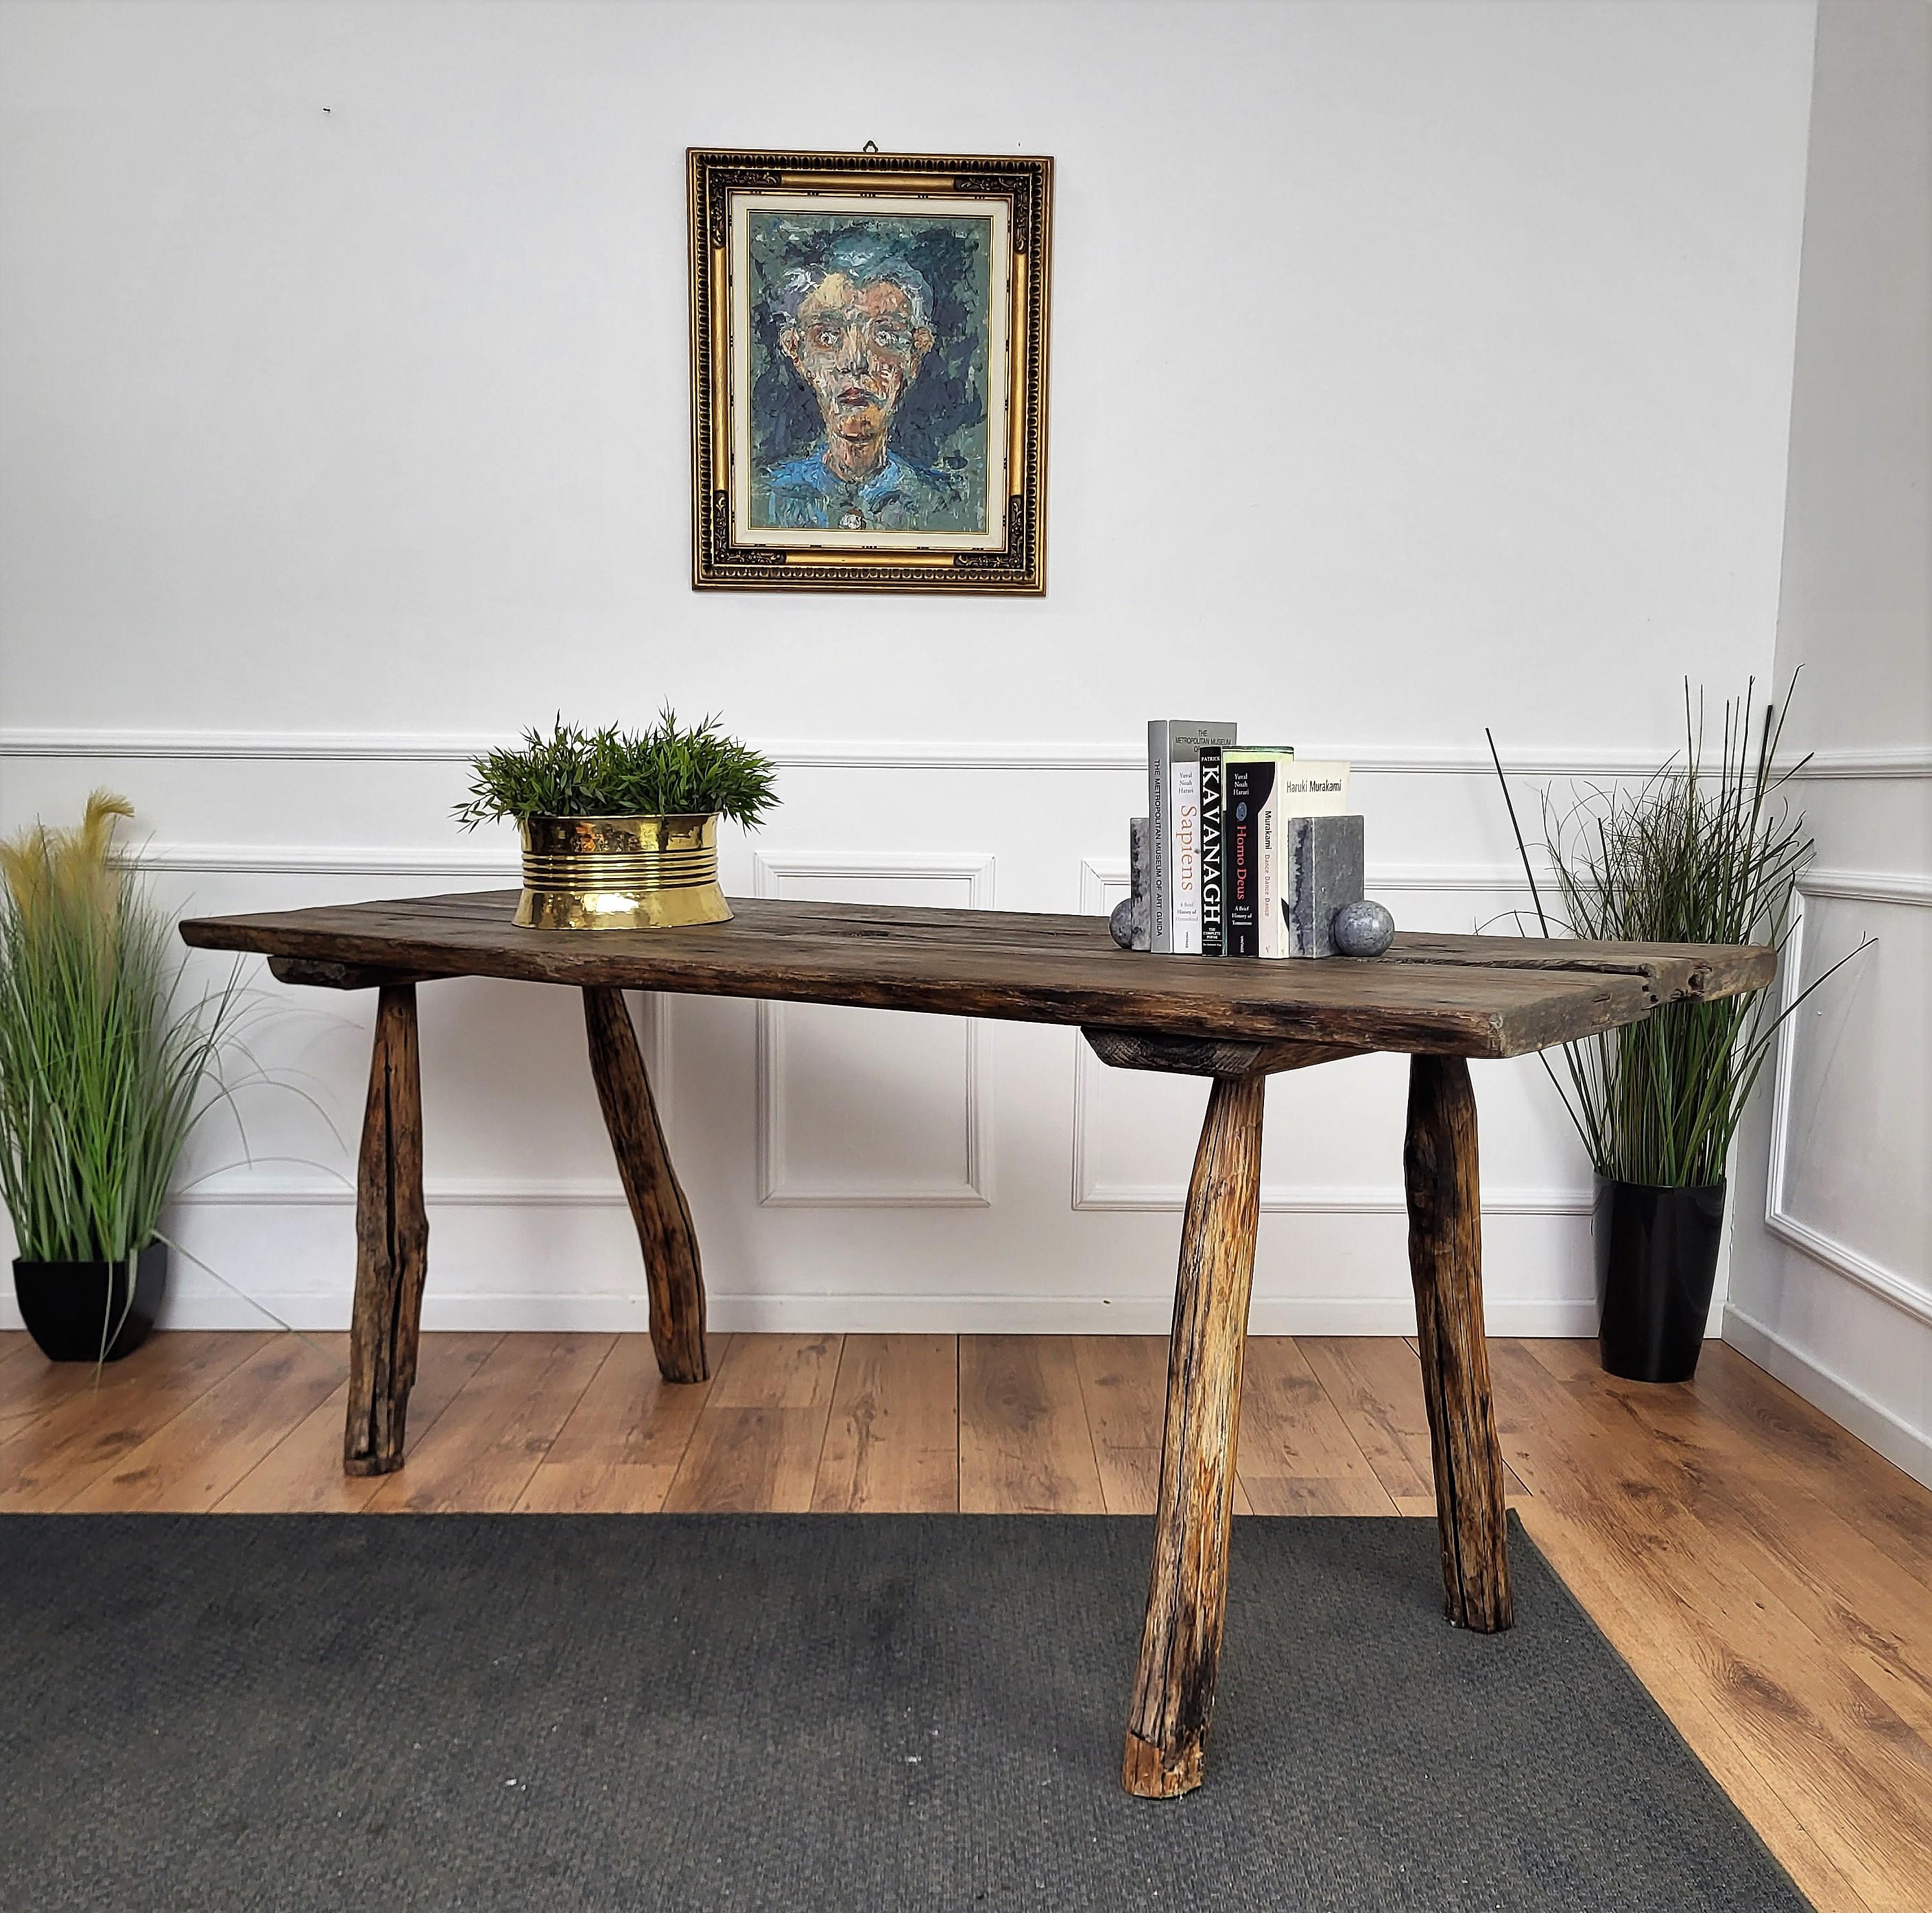 Beautiful Italian rustic primitive country wooden table, with typical legs in original aged natural color giving the rich and beautiful patina that makes it look wonderful in every interior. This piece is in the rustic primitive spirit of organic